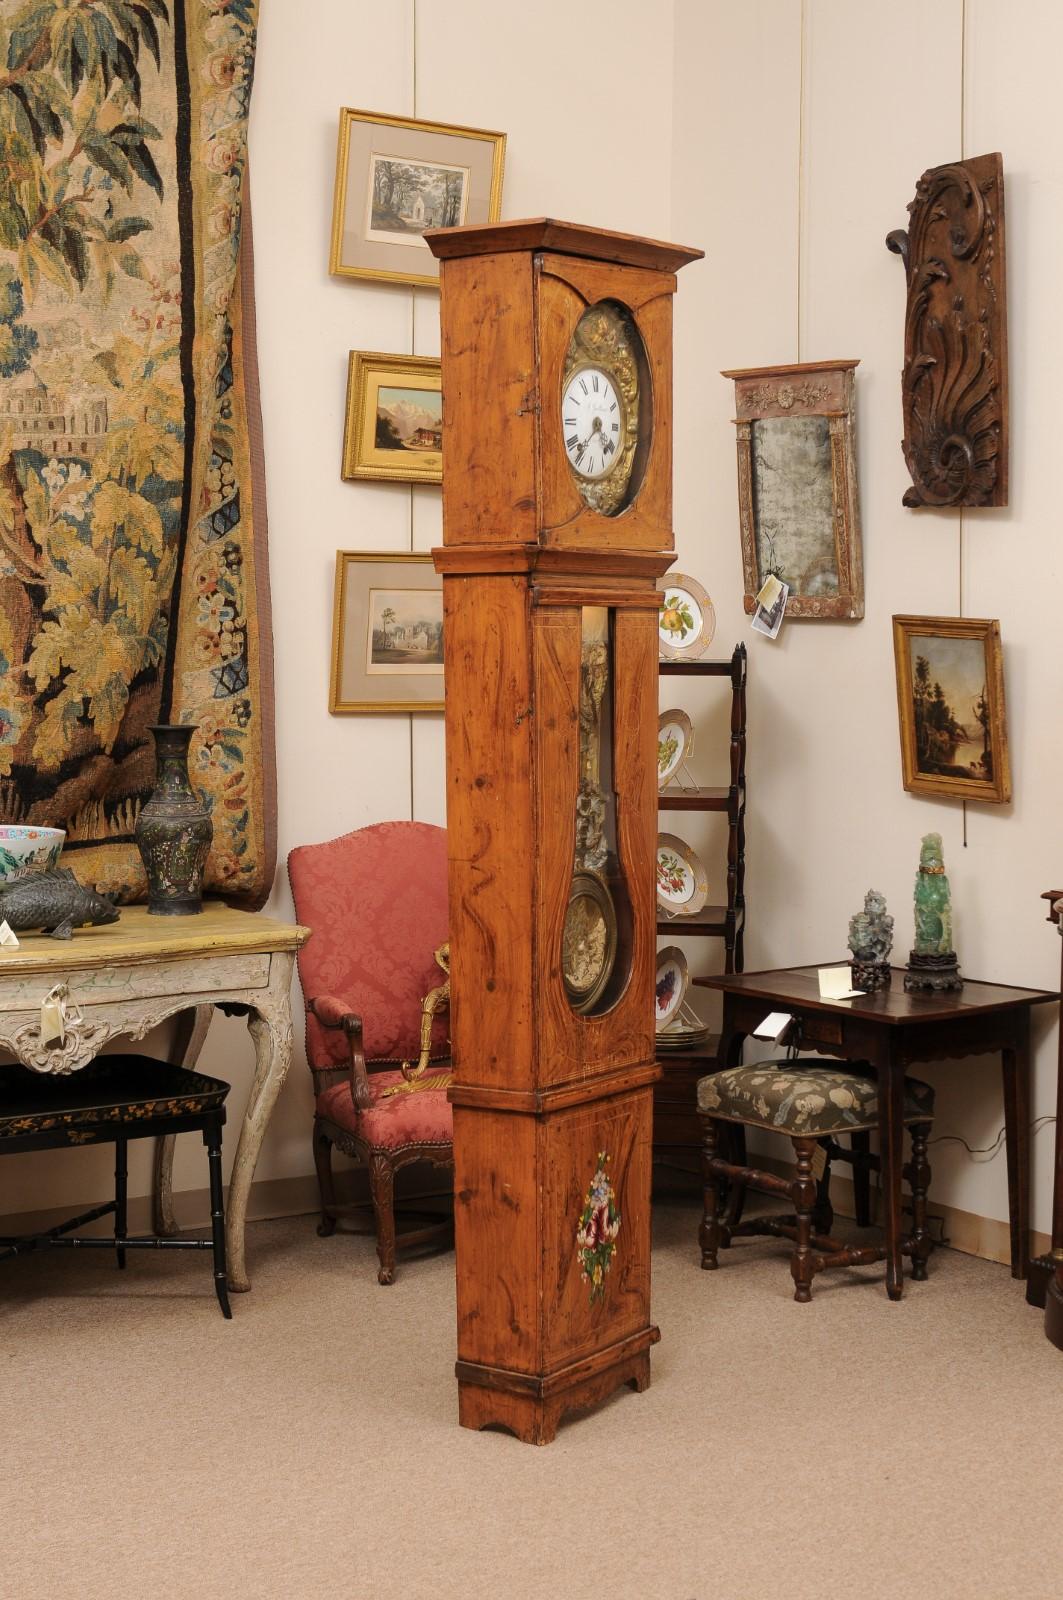 19th Century French Faux Bois Painted Tallcase Clock with Pressed Gilt Metal & Enamel Face, signed “A. Guillemont”